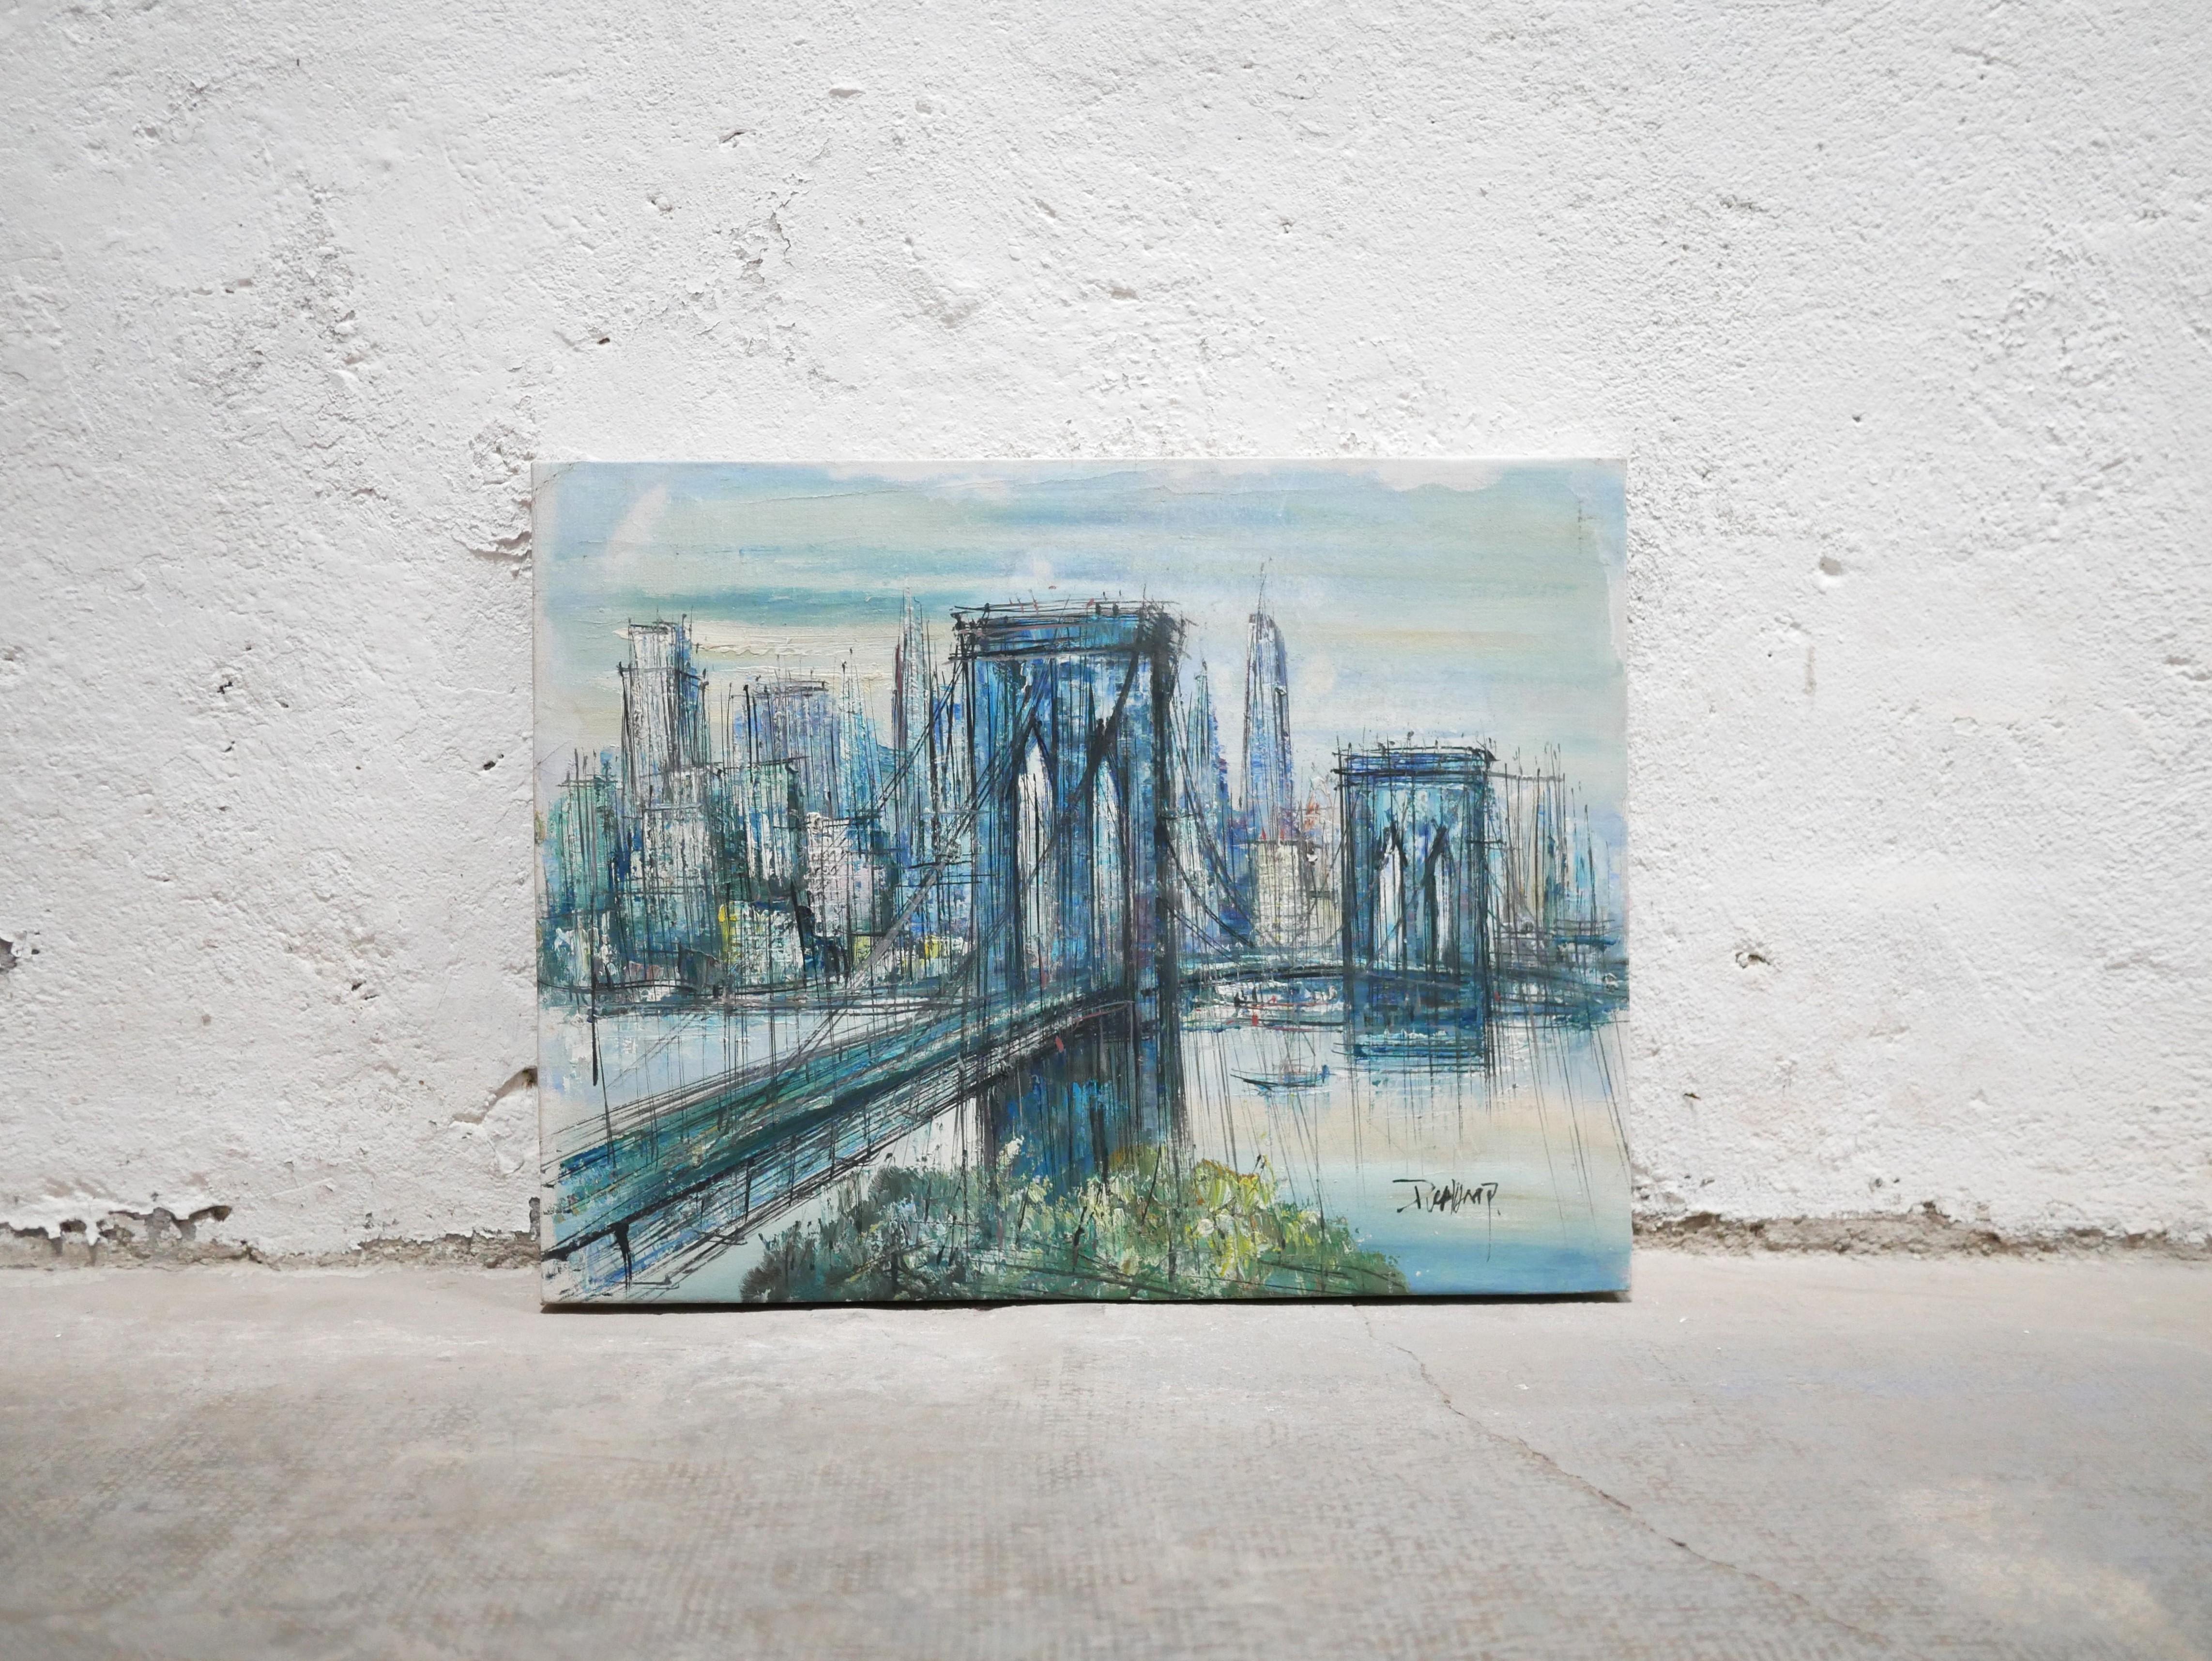 Oil on canvas The Brooklyn Bridge in New York signed by the French painter Suzanne Duchamp dating from the 50s.

Coming from a family of artists, she is the sister of Jacques Villon, Raymond Duchamp-Villon and Marcel Duchamp. His works have been